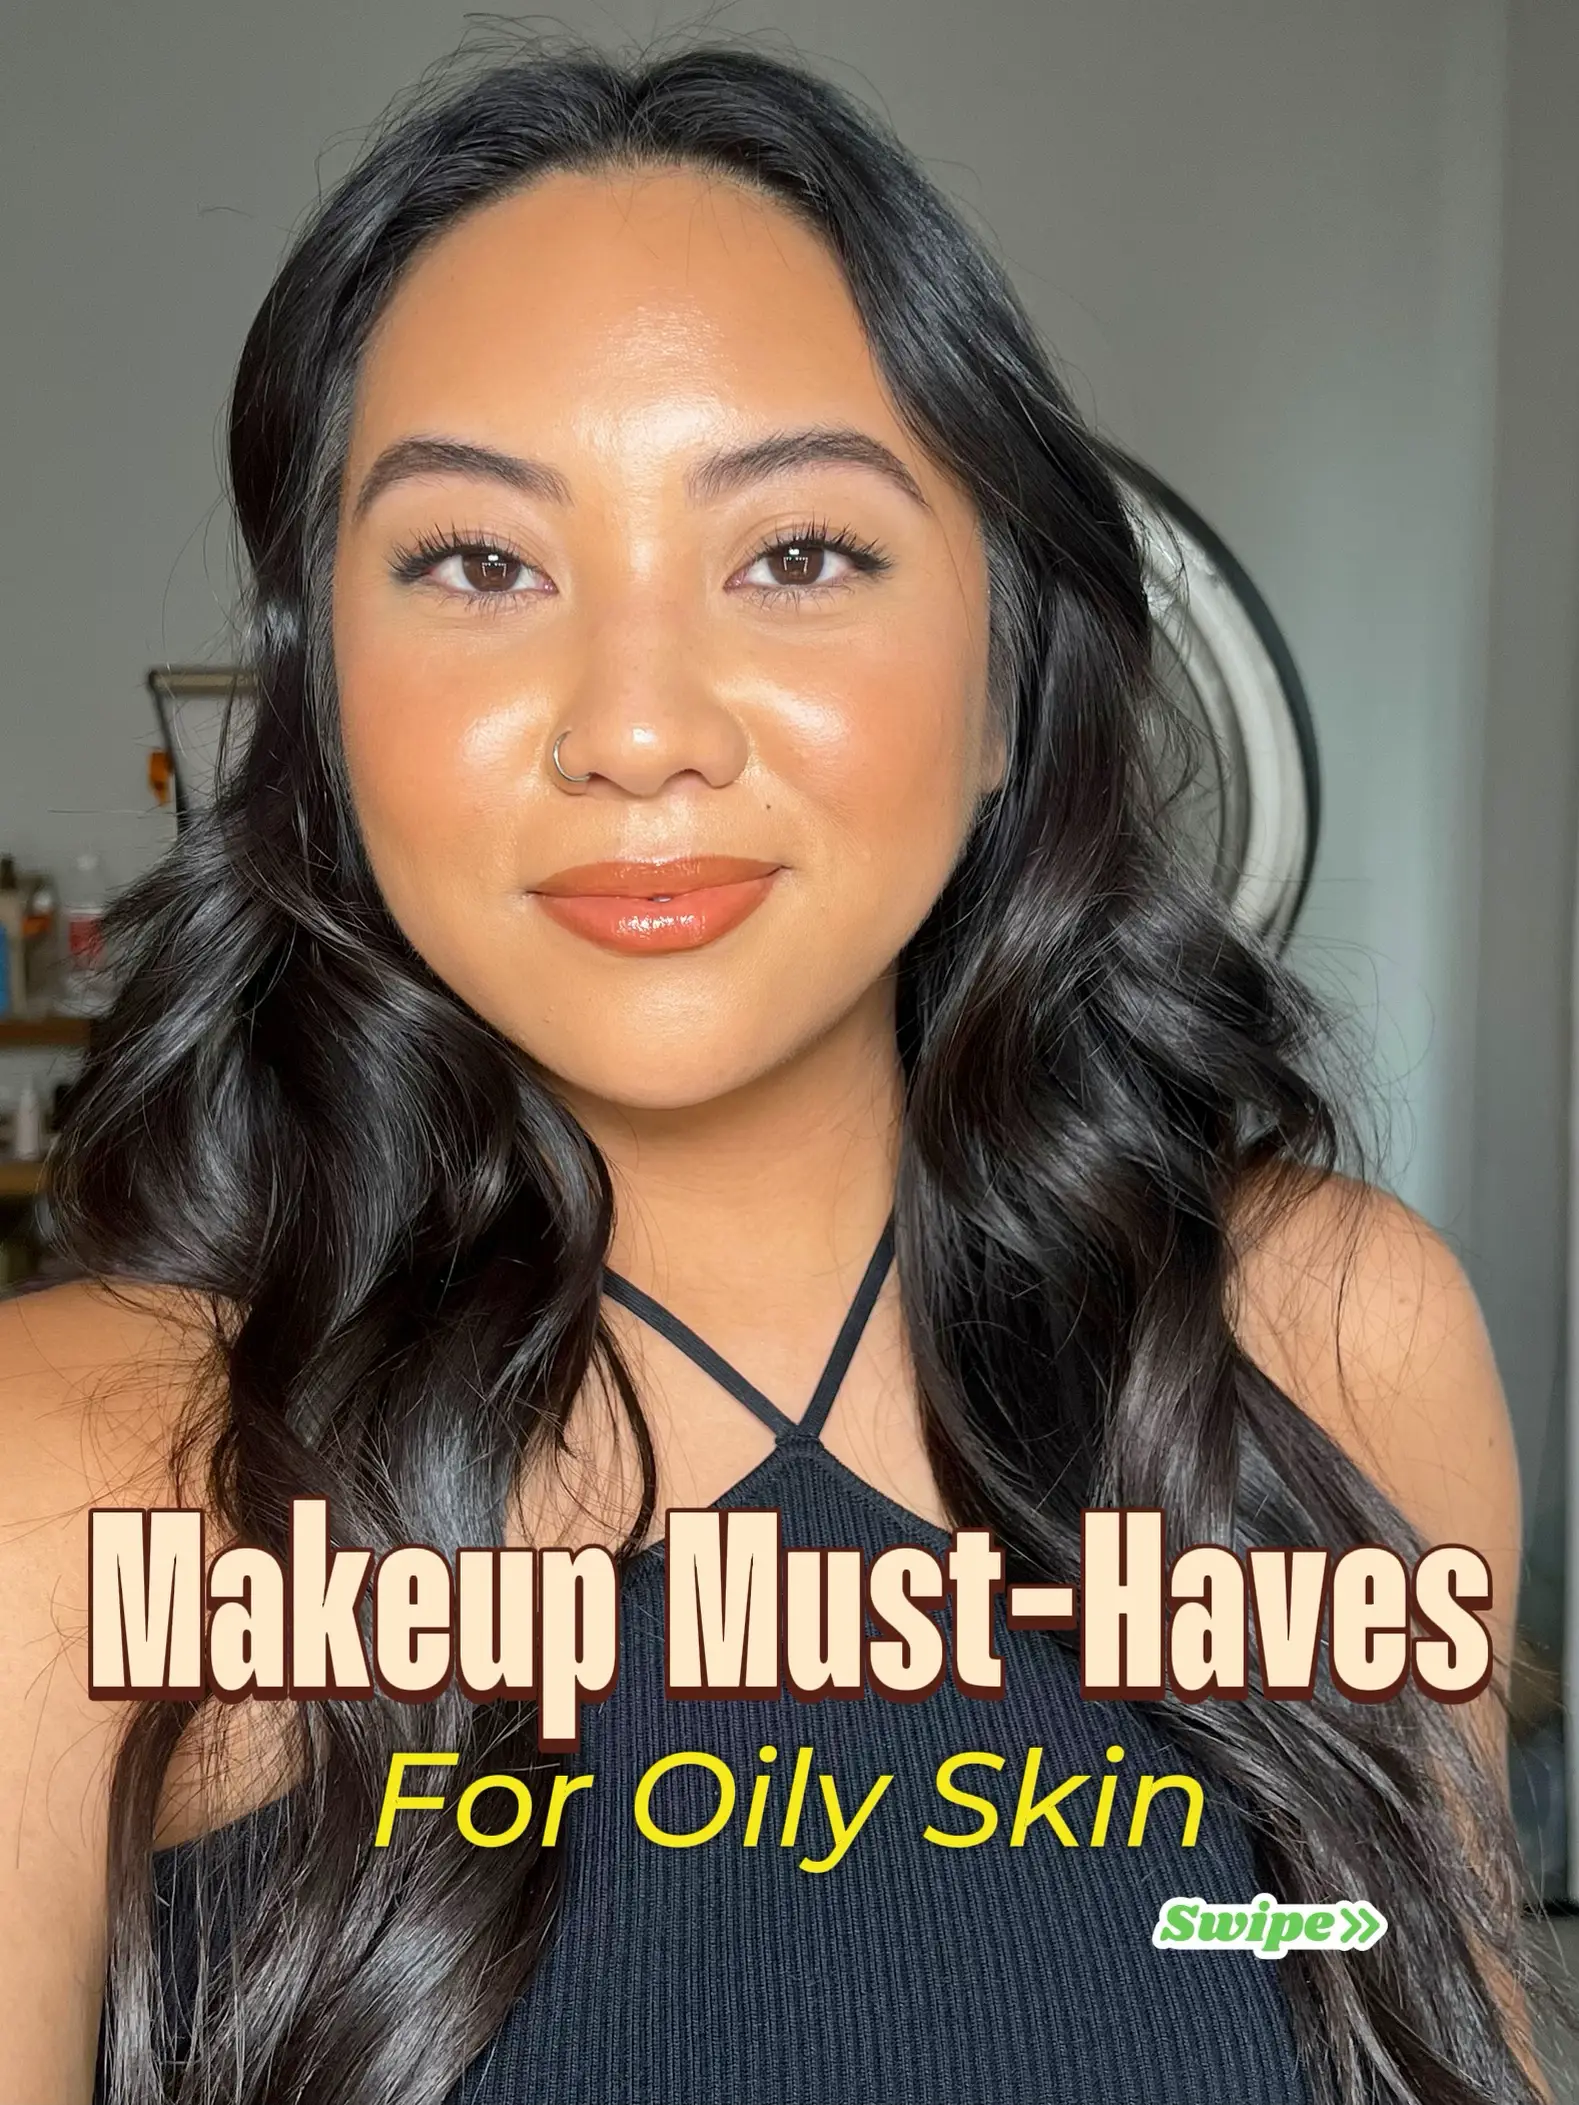 Makeup You Need For Oily Skin